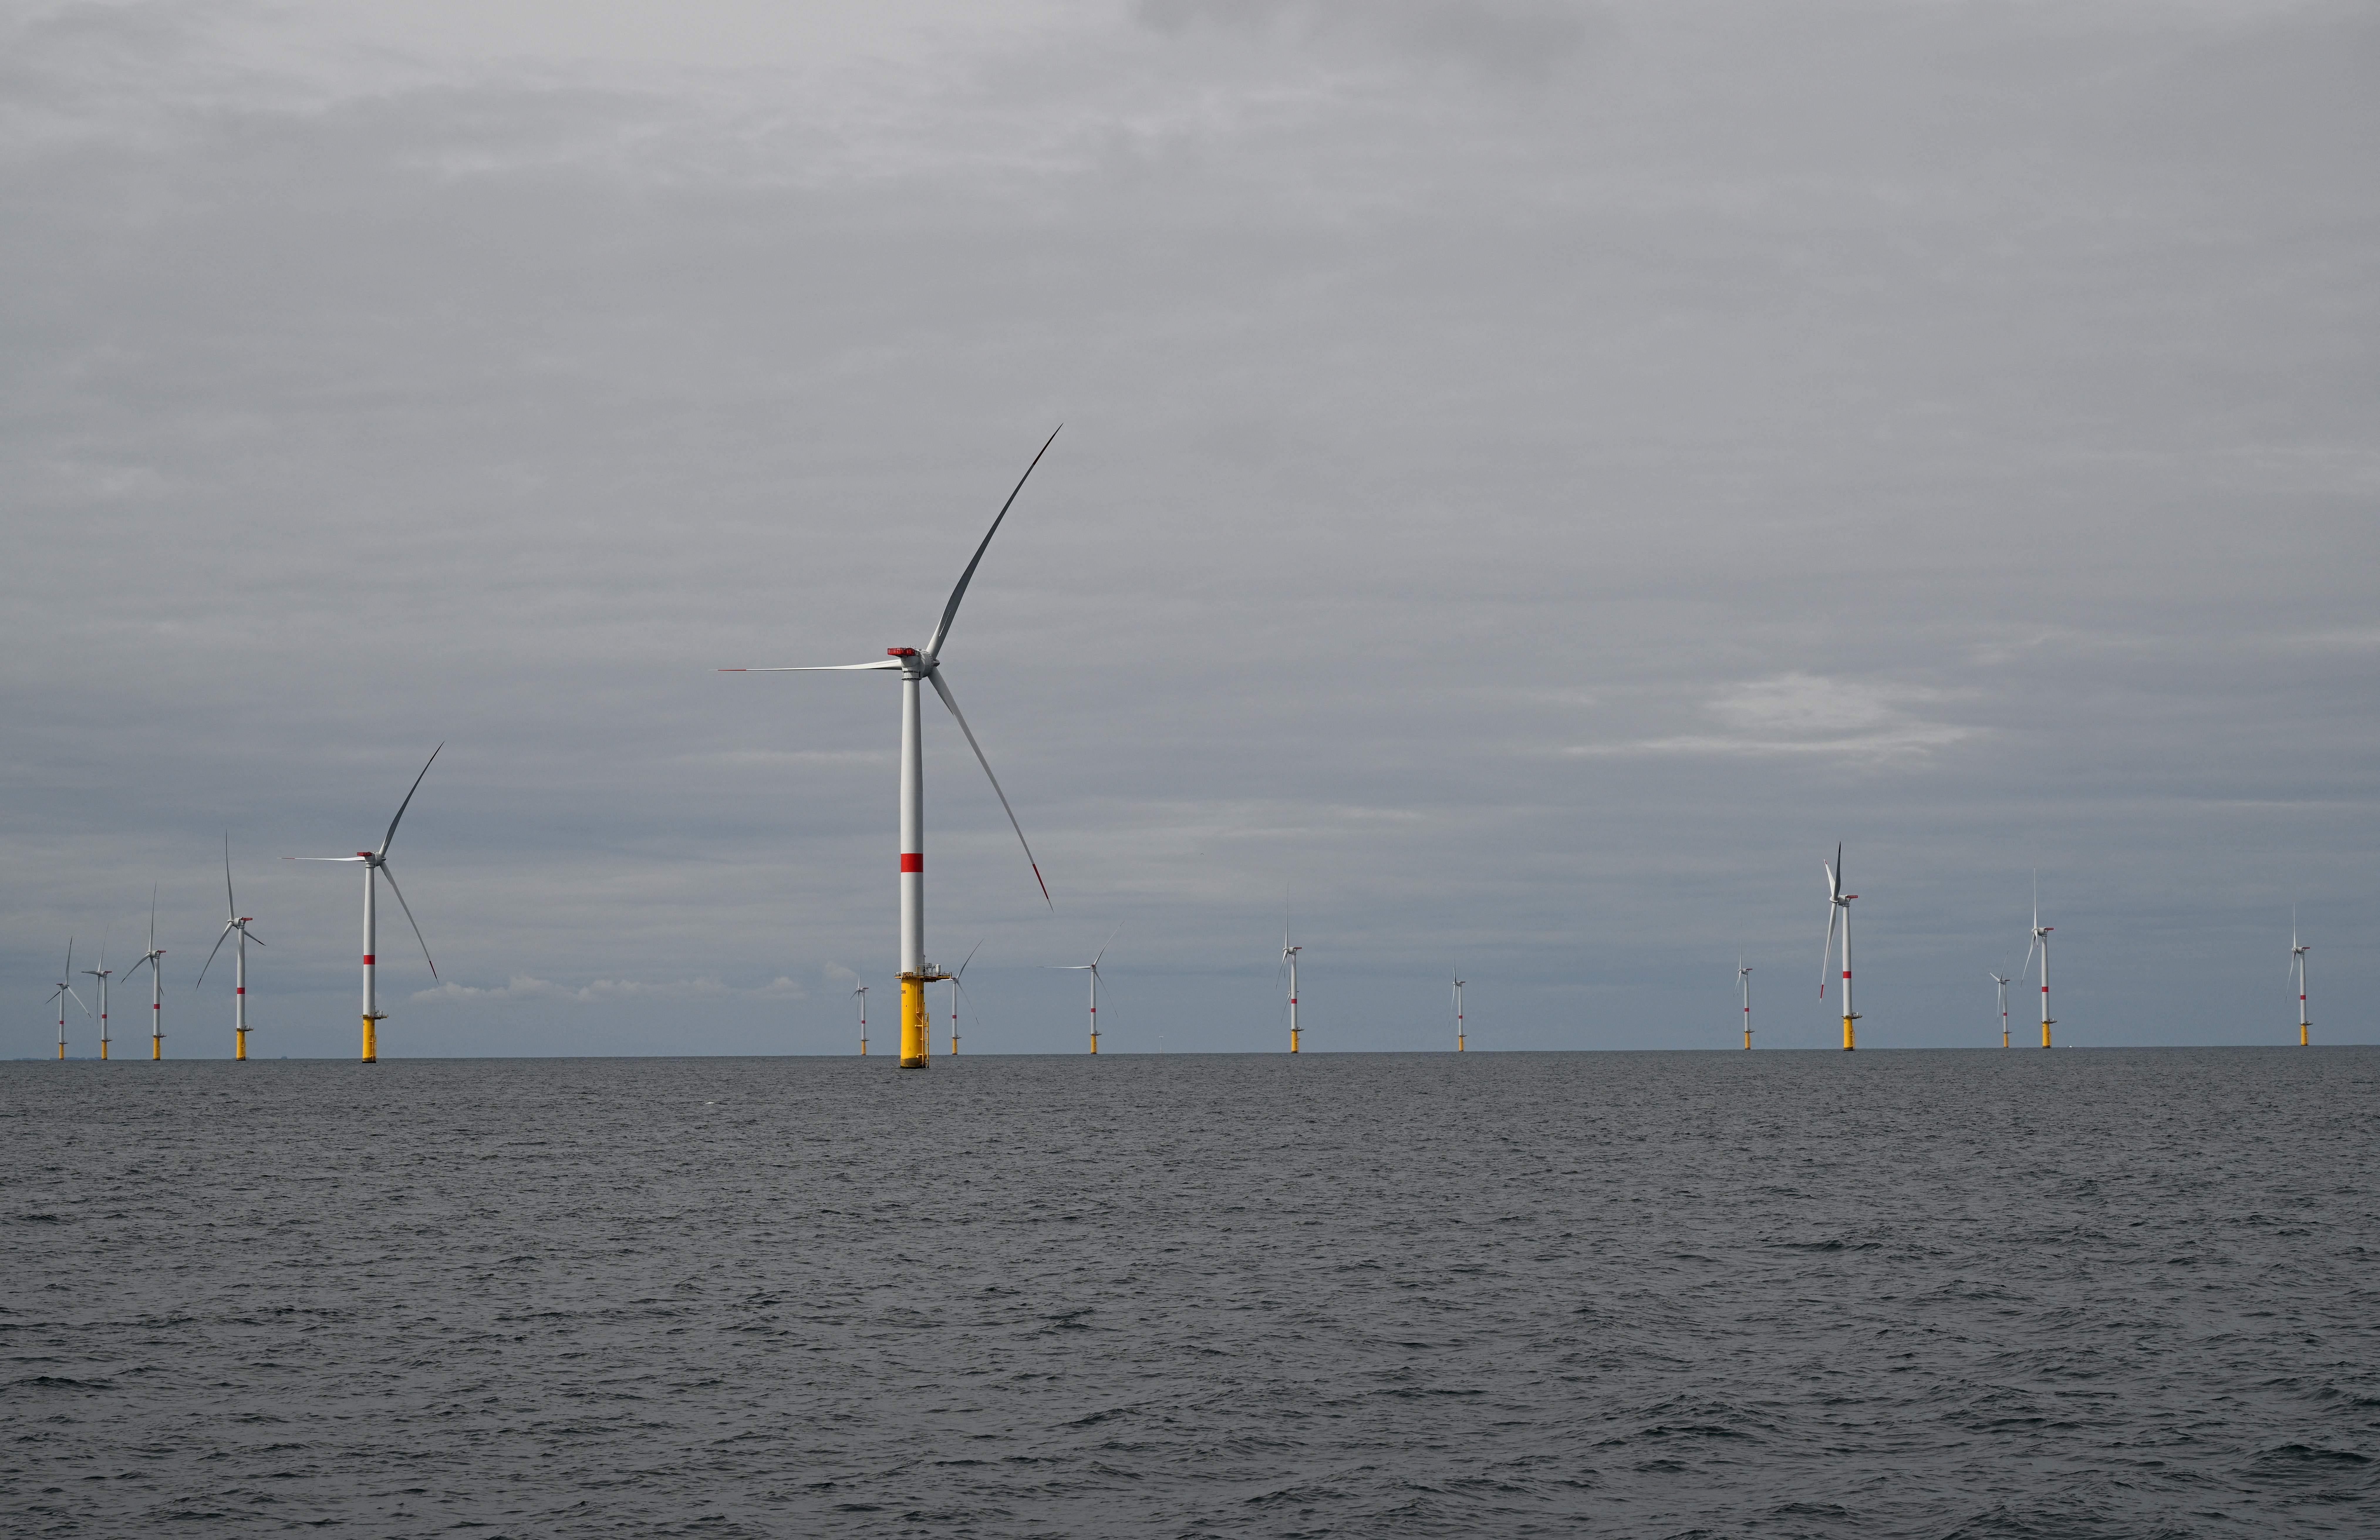 Wind turbines are pictured on the first French offshore wind farm off the coasts of La Turballe, western France on September 30, 2022. – The wind farm, consisting of 80 wind turbines, will supply 480MW, with an investment of 2 billion euros (Photo by Damien MEYER / AFP) (Photo by DAMIEN MEYER/AFP via Getty Images) 